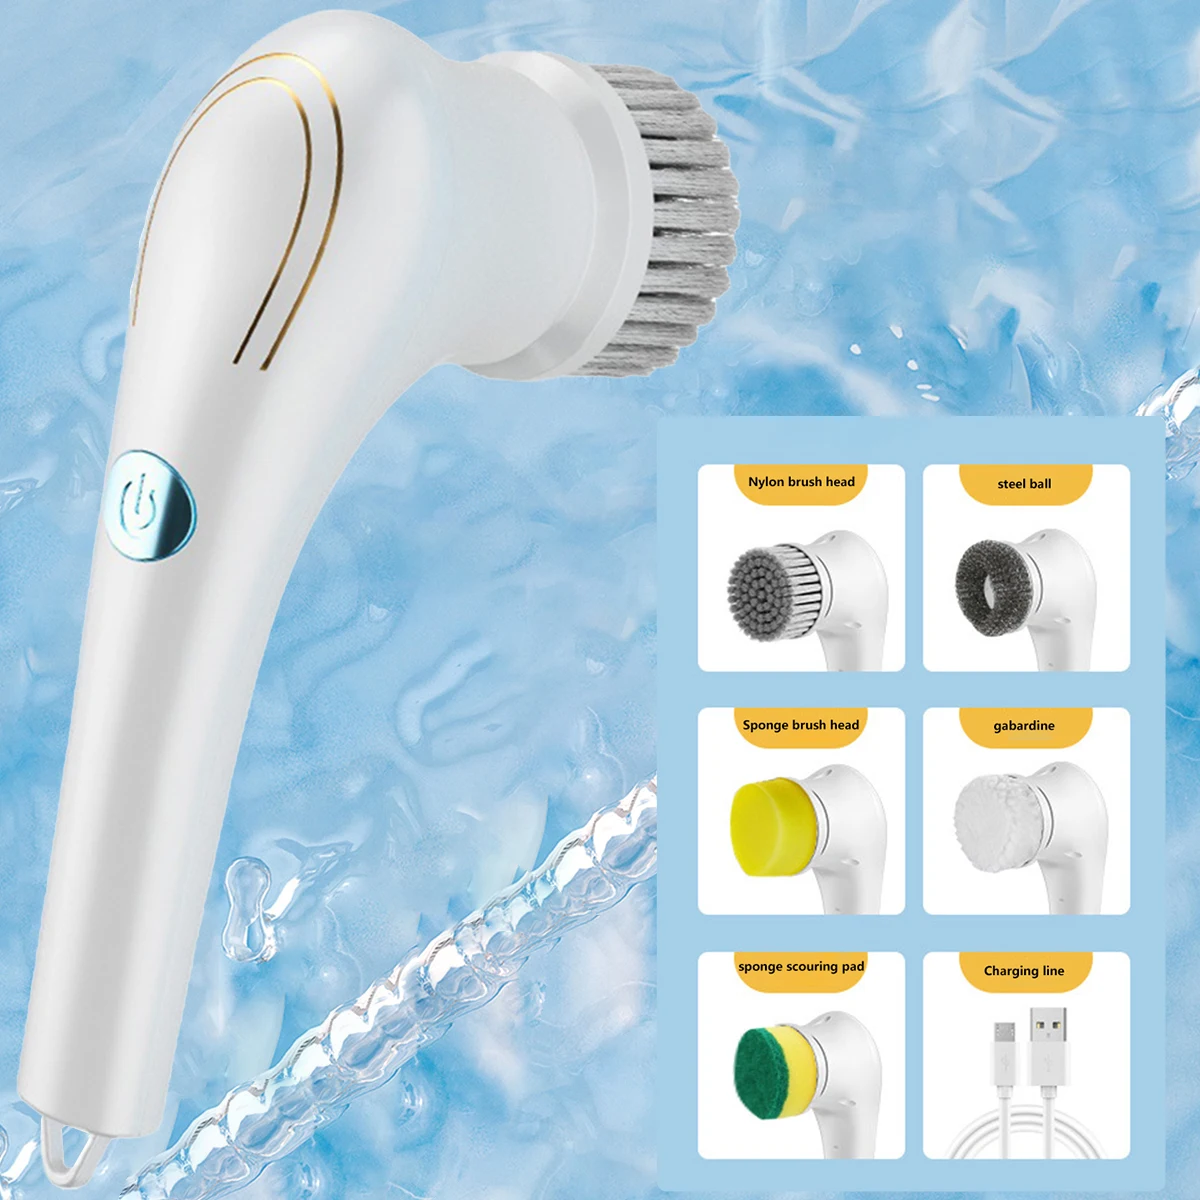 Electric Spin Scrubber Cordless Power Spinning Scrub Brush Handheld Shower  Cleaner Brush with 4 Brush Heads Durable - AliExpress